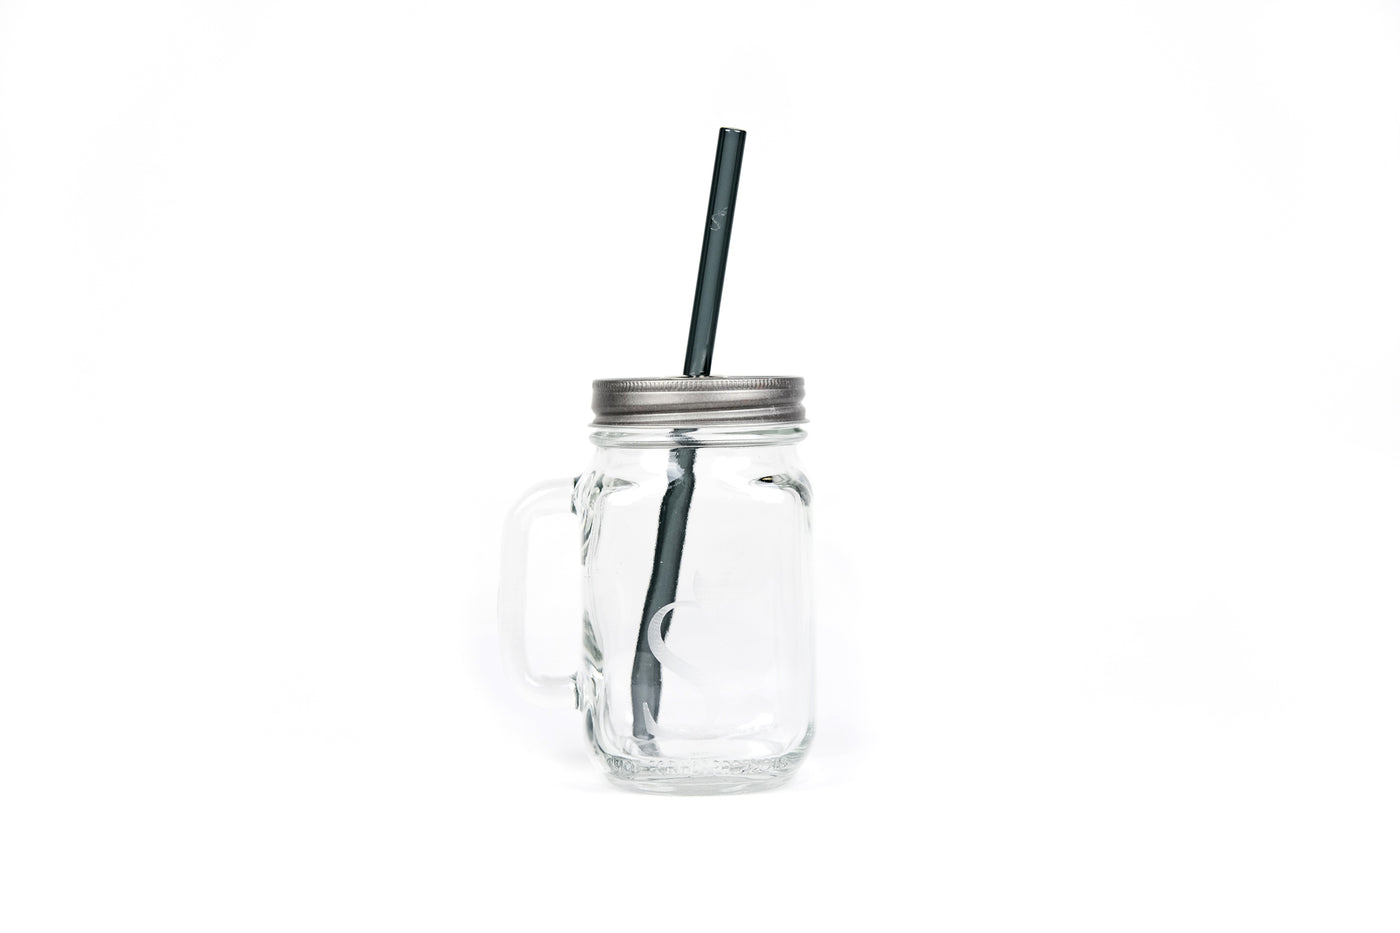  NETANY 16-Pack Reusable Glass Straws, Clear Glass